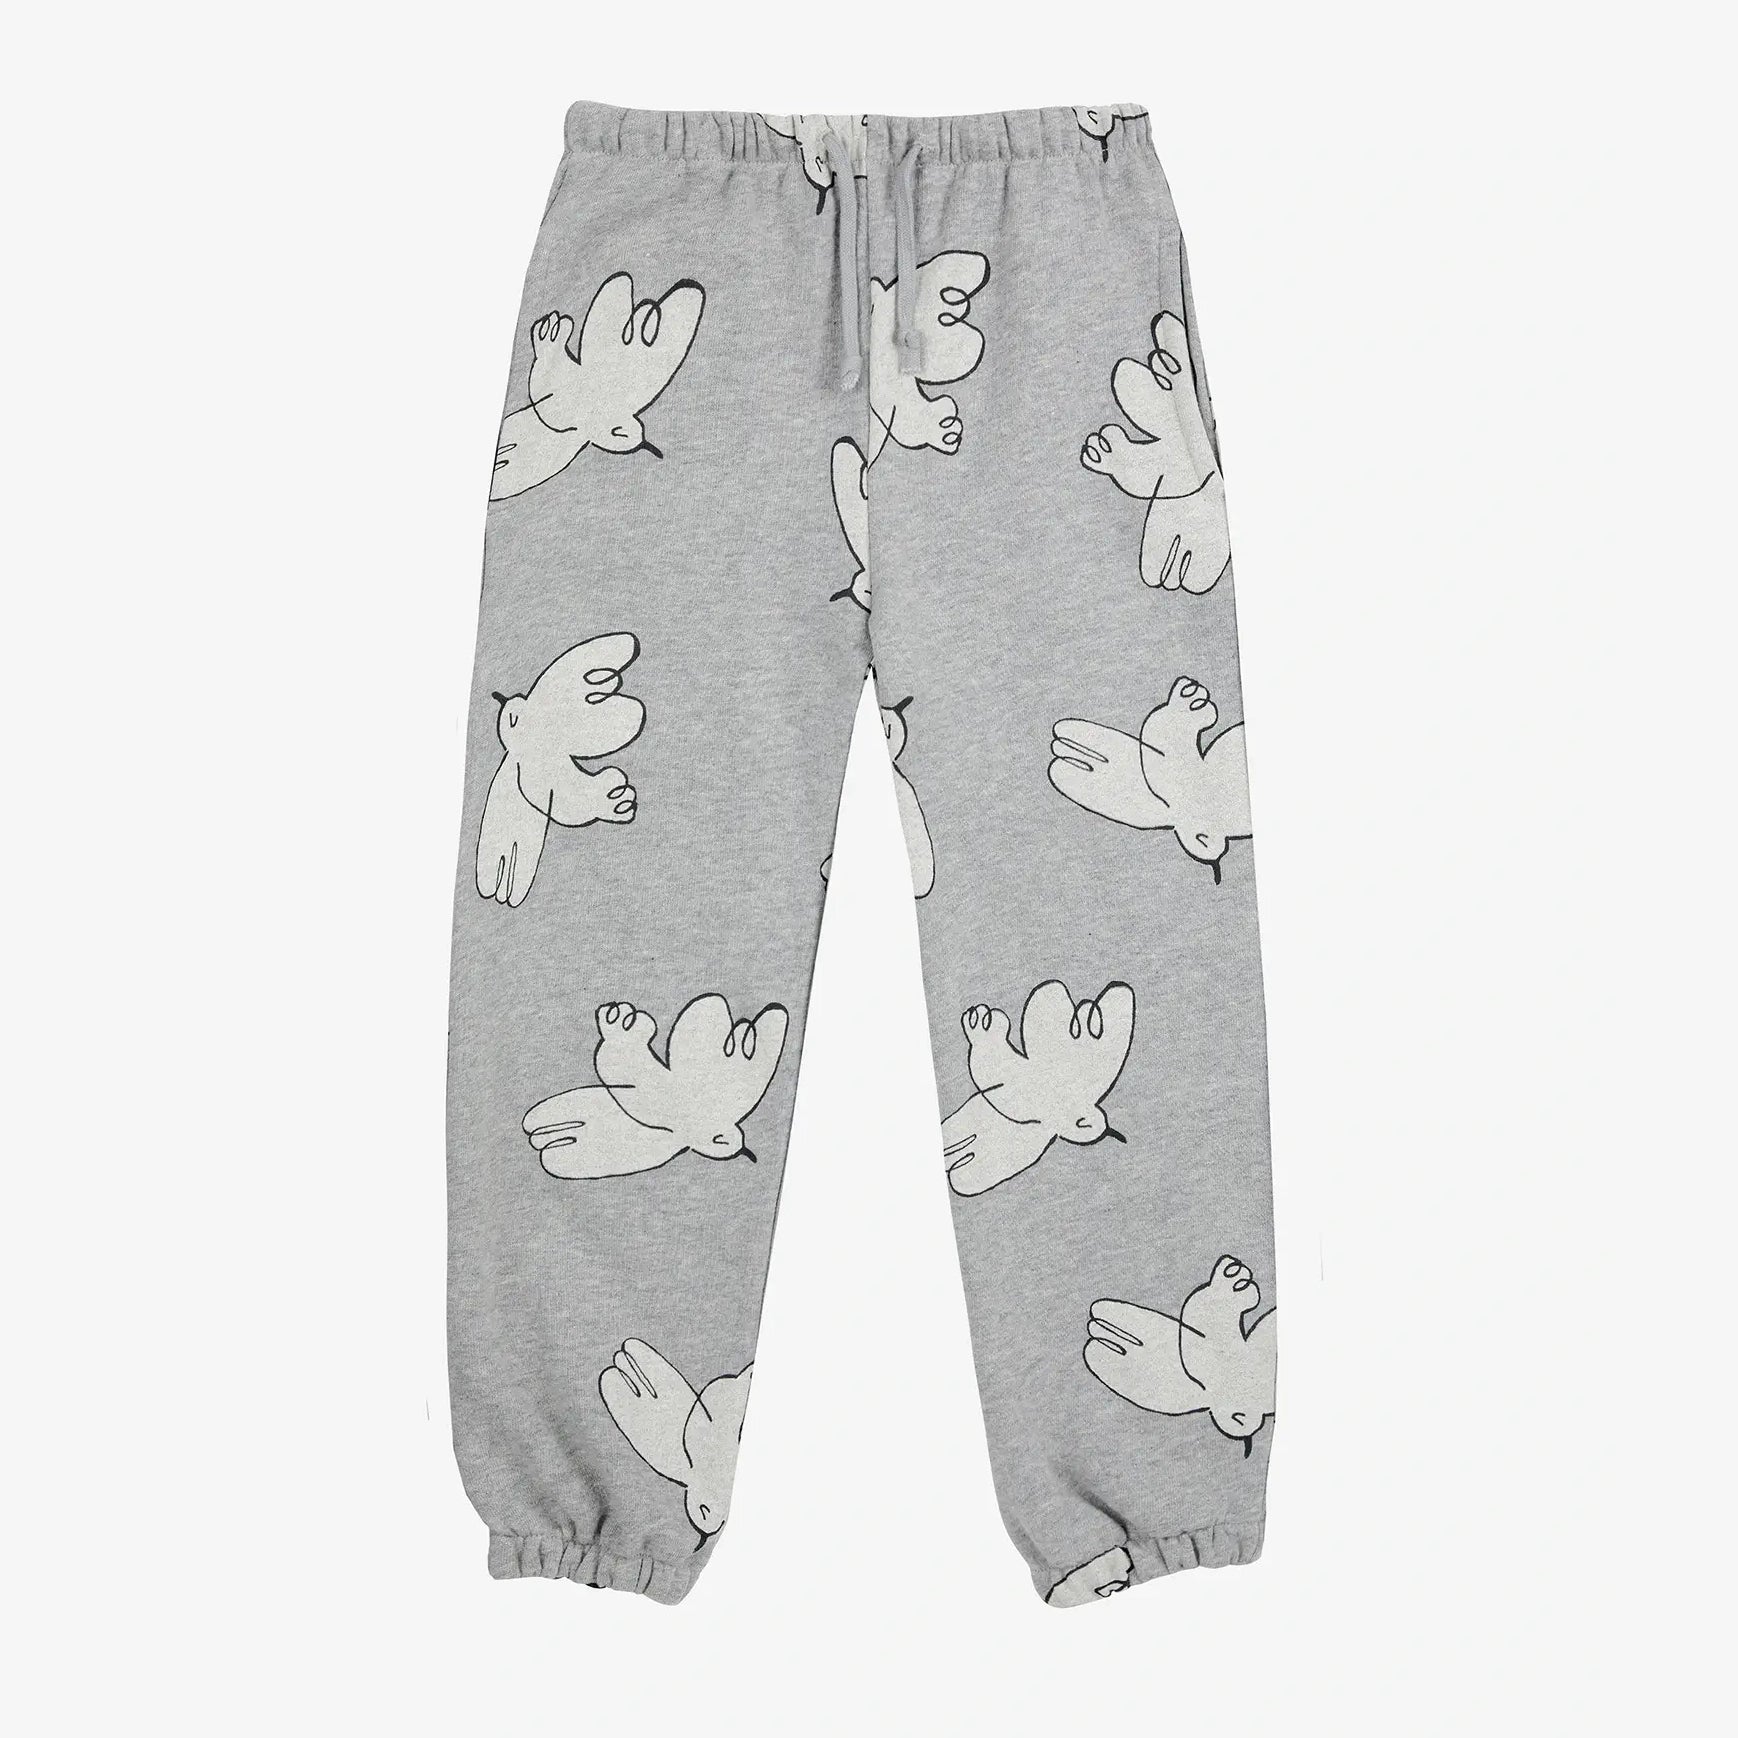 Freedom Bird all over jogging pants